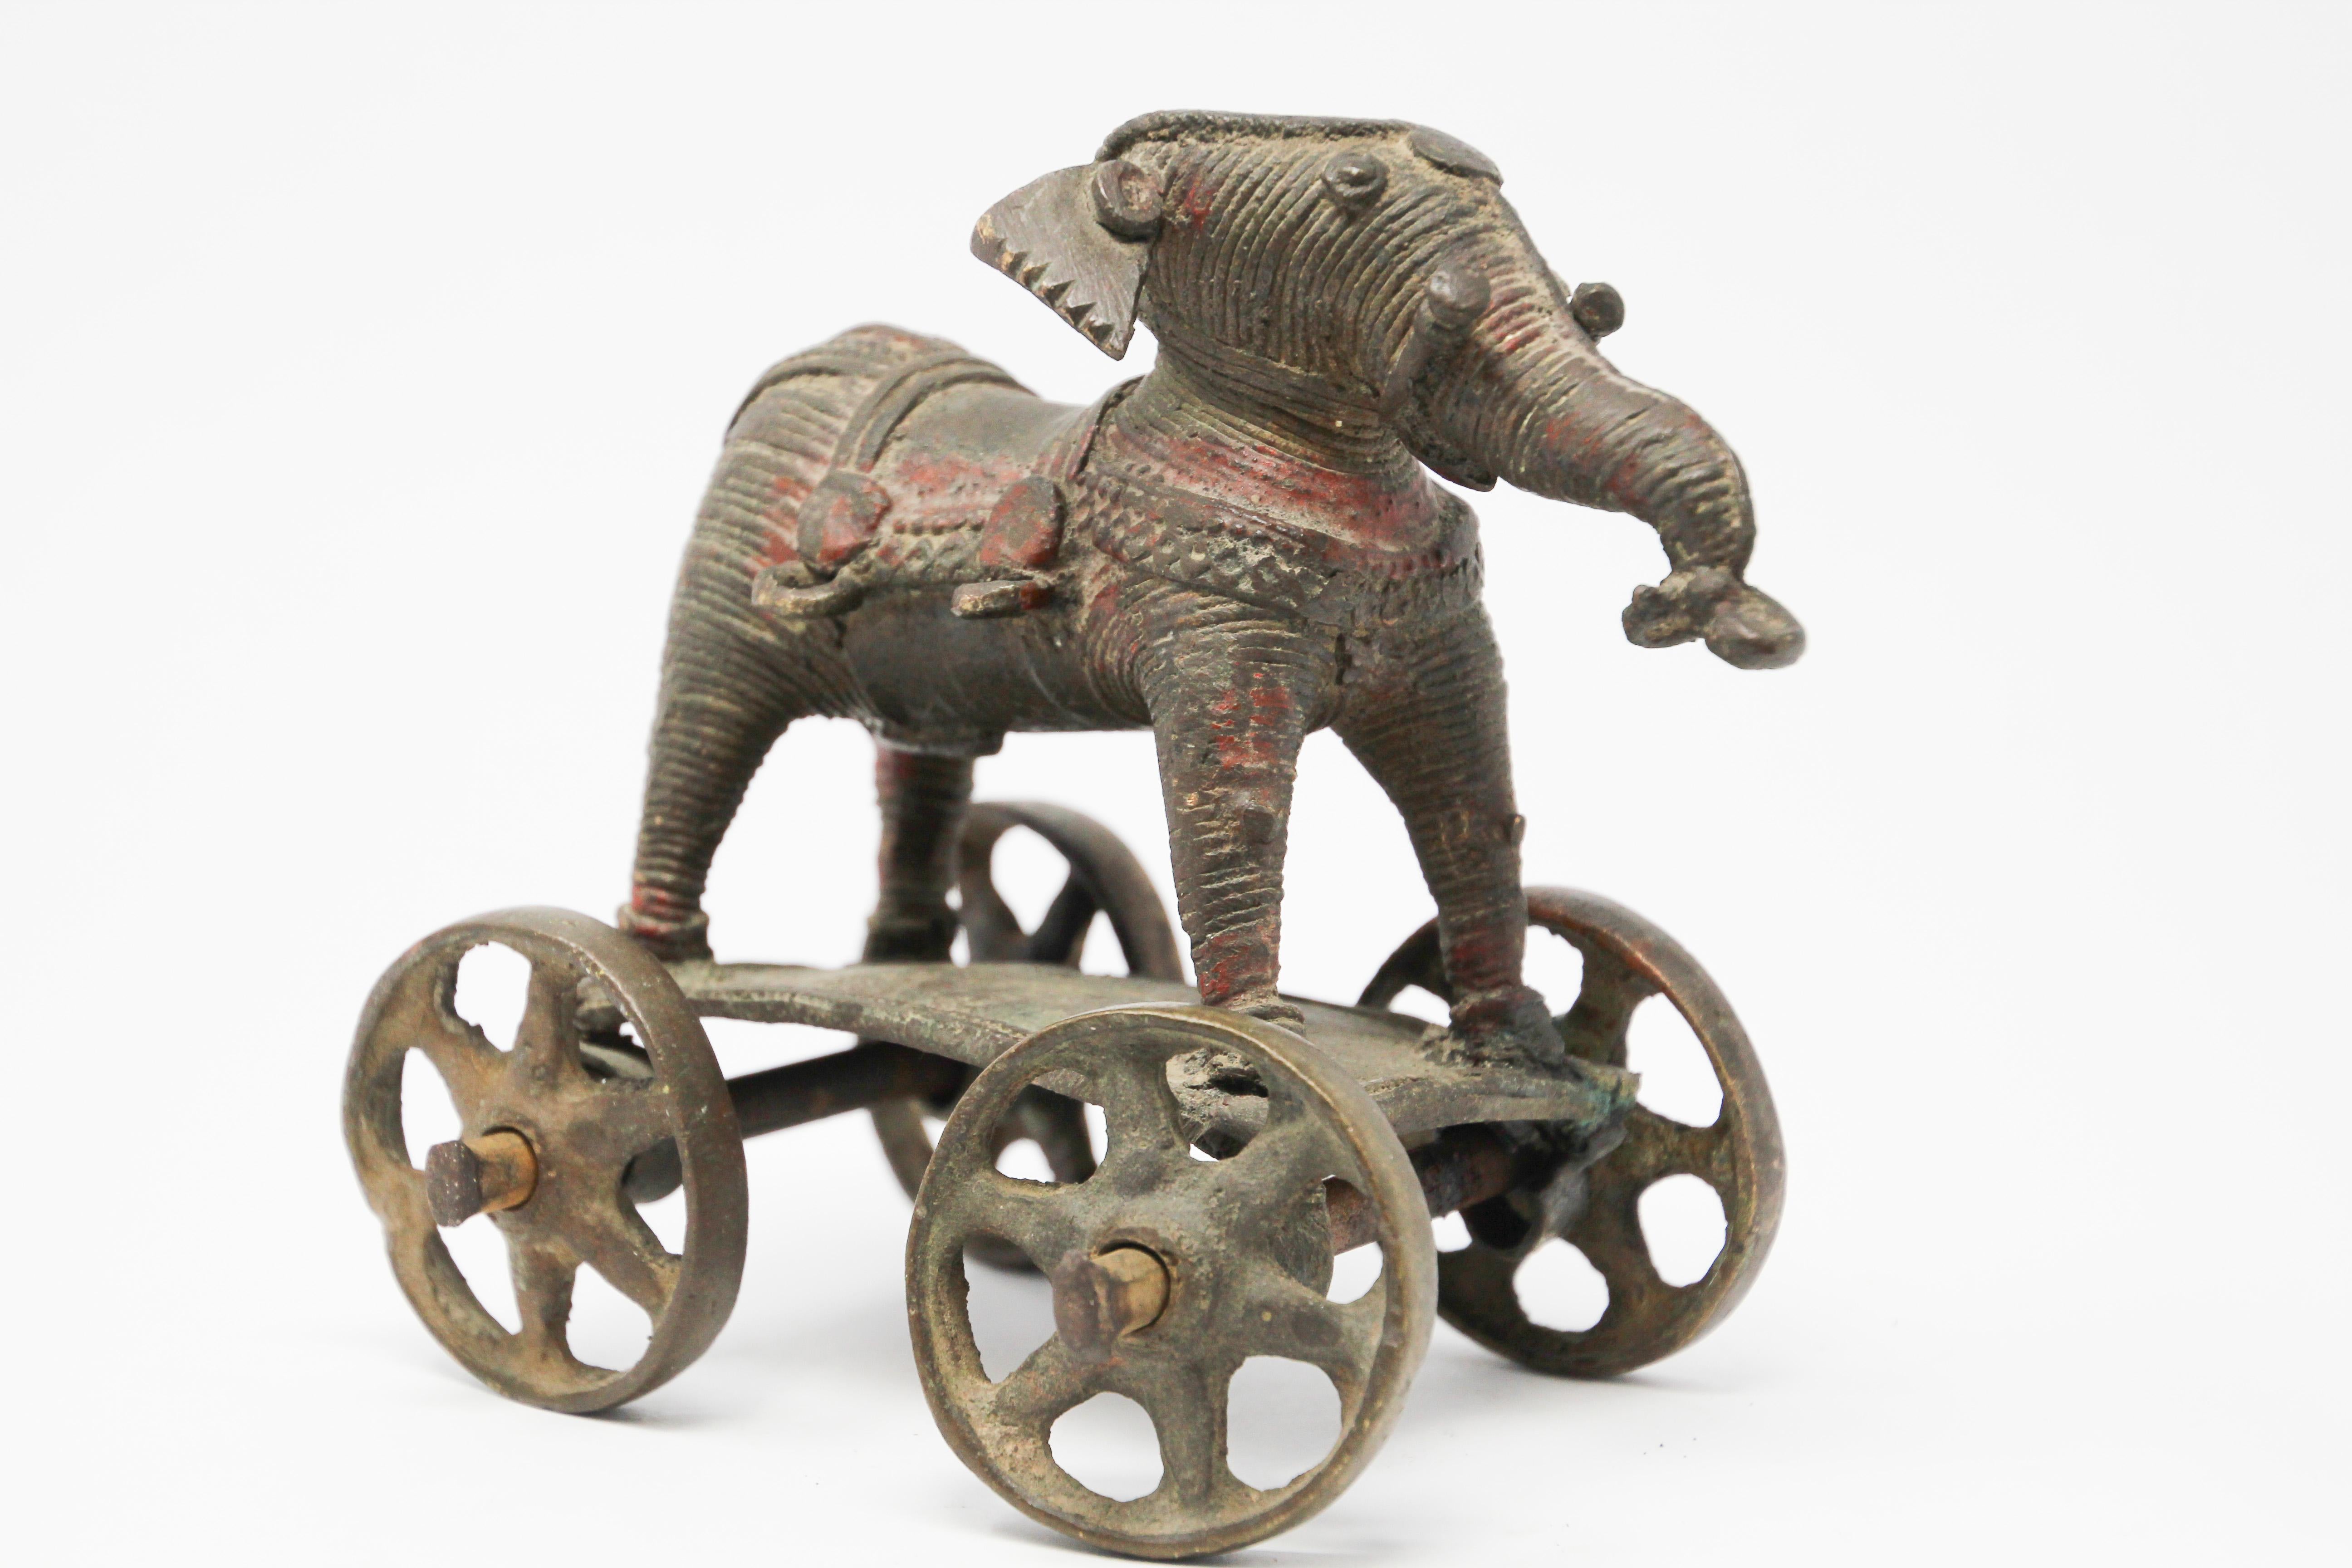 Antique cast bronze elephant temple toy on wheels from India.
This beautifully patinated brass temple elephant on wheels is from Bhundi in Rajasthan.
This would look perfect on a desk and is heavy enough to use as a paperweight
19th century Hindu